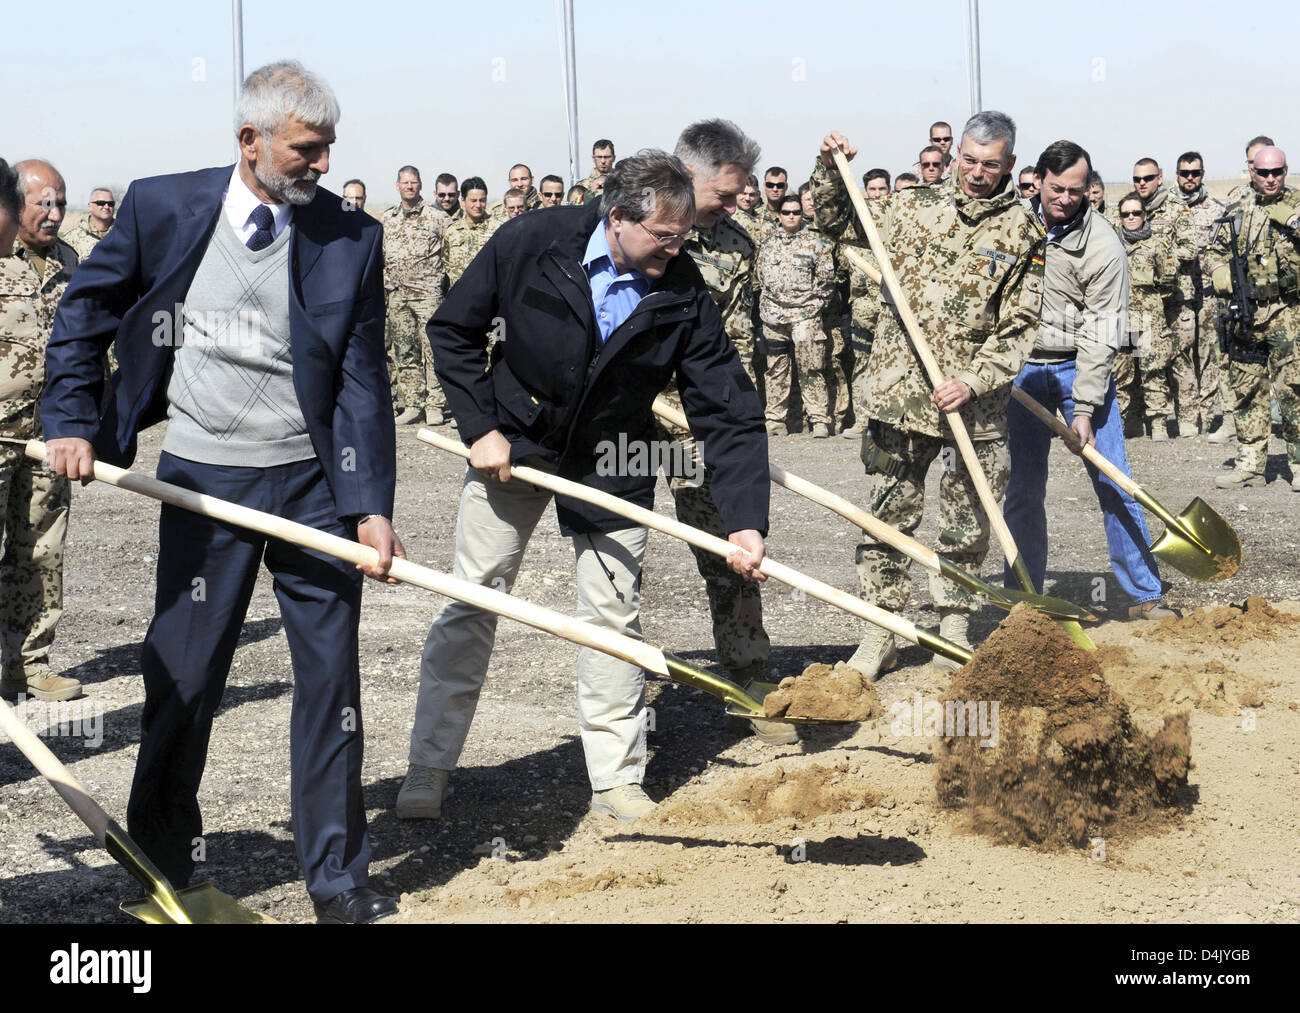 (L-R) Afghan Vice Transport Ministerm, Mr Alami, German Defence Minister Franz Josef Jung, the assistant chief of staff at the ISAF headquarters, Hans-Erich Antoni, and ISAF Commander North, Joerg Vollmer perform the ground breaking ceremony for the new runway at the airport in Masar-i-Scharif, Afghanistan, 10 March 2009. The new runway for the designated air traffic hub will be 3, Stock Photo